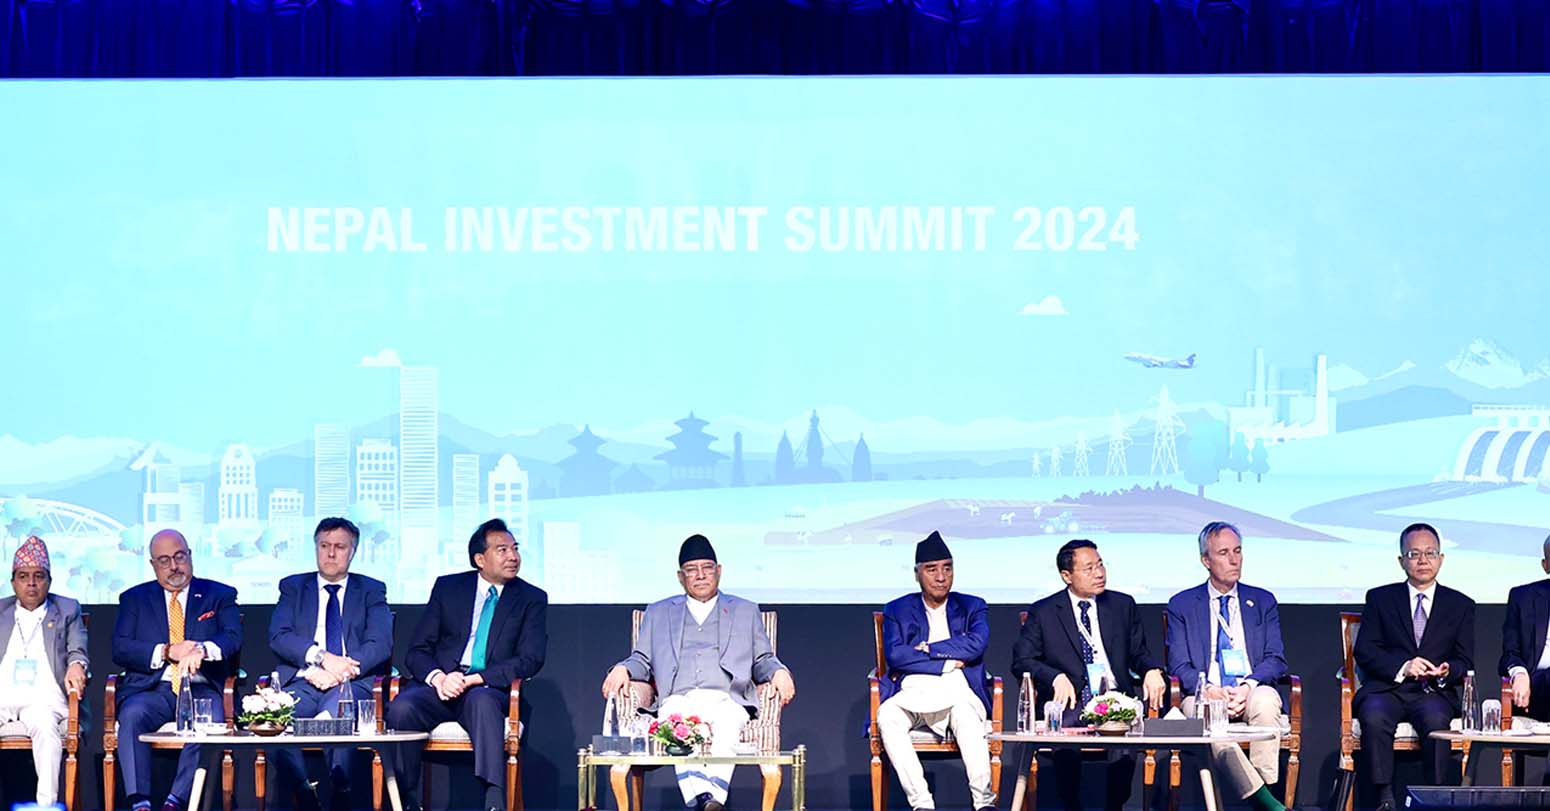 Investment Summit 2024: Govt Seeking Letters Of Intent For 20 Projects